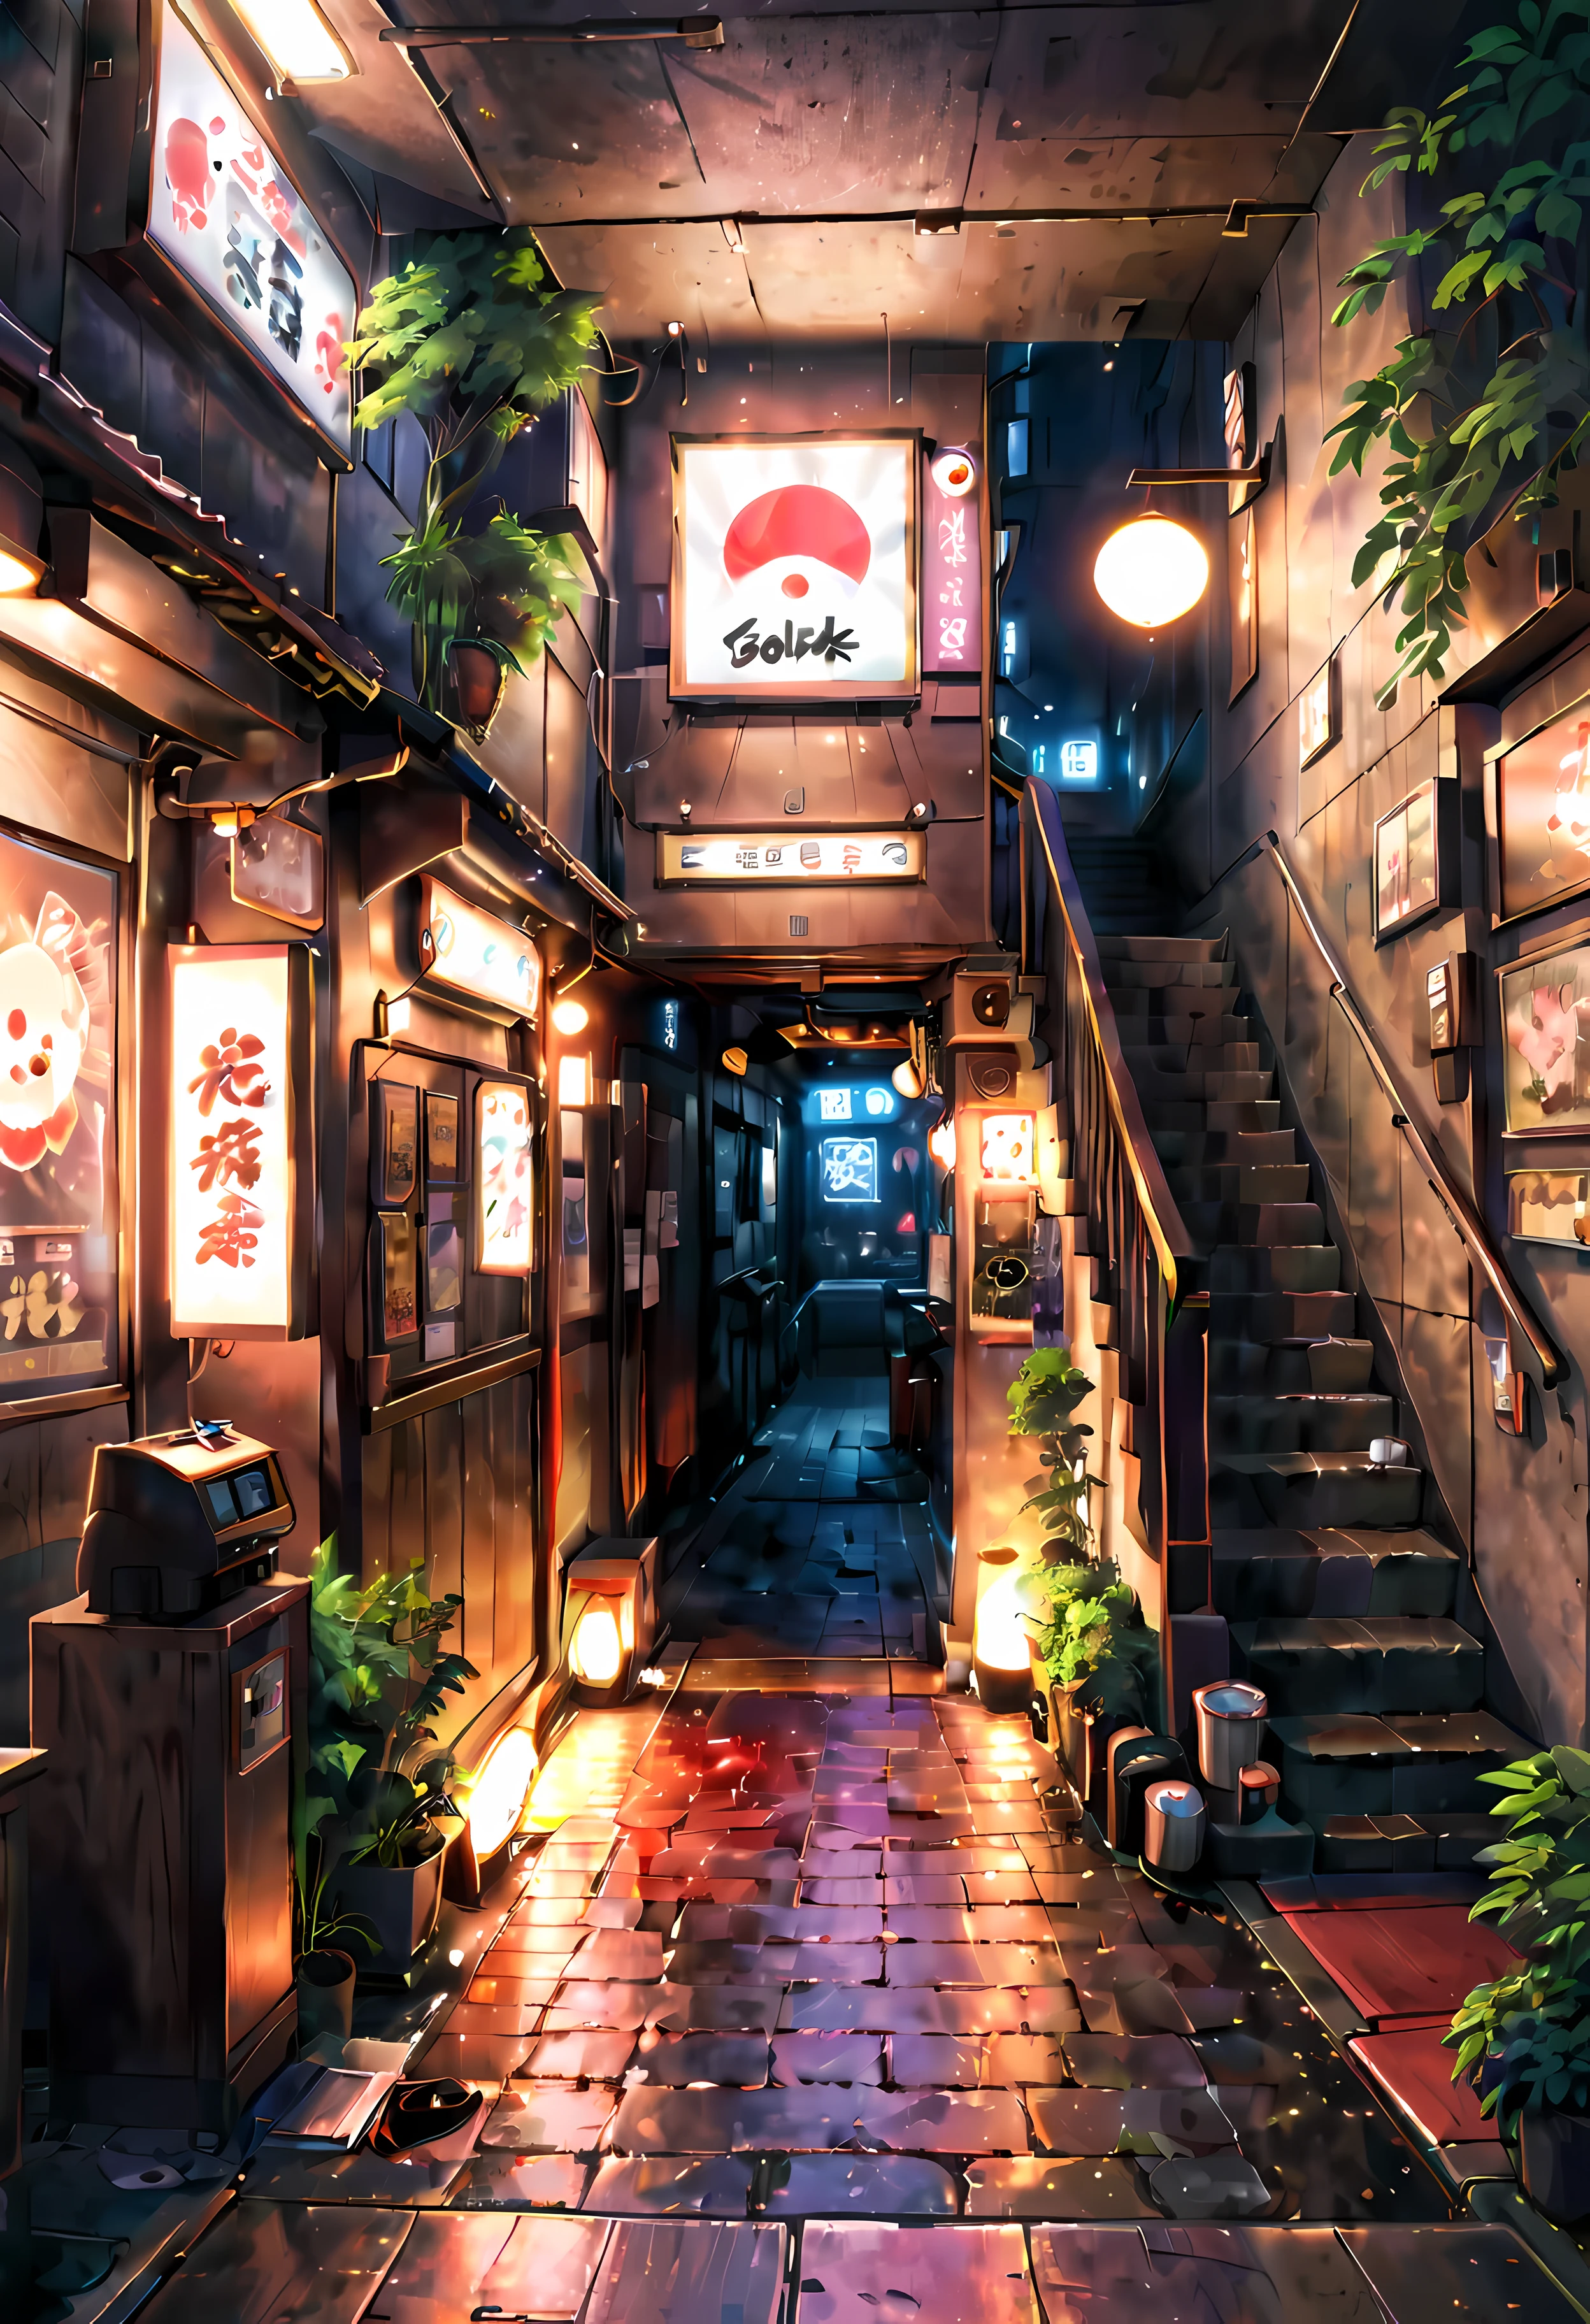 ((best quality,ultra-detailed,realistic):1.37). | anime style,((tokyo underground pub):1.3),((entrance under a stairs):1.25),neon lights,cosplay,graffiti art,no human ,smoky atmosphere,ramen stall,empty tables,hip hop music,techno beats,red brick walls,overgrown vines,sloping ceiling,dark wooden floor,low-lit lamps,distinctive street fashion,flickering lanterns,sake bottles,ramen bowls,wooden barrels,hidden corner seats,vibrant murals,arcade machines,anime posters,glowing neon signs,street vendor food stall,urban underground culture,secretive meeting spot,steaming bowls of miso ramen. | ((Unparalleled sharpness and clarity):1.1), ((Radiosity rendered in stunning 32K resolution):1.3), All captured with sharp focus. | (((More_detail))).